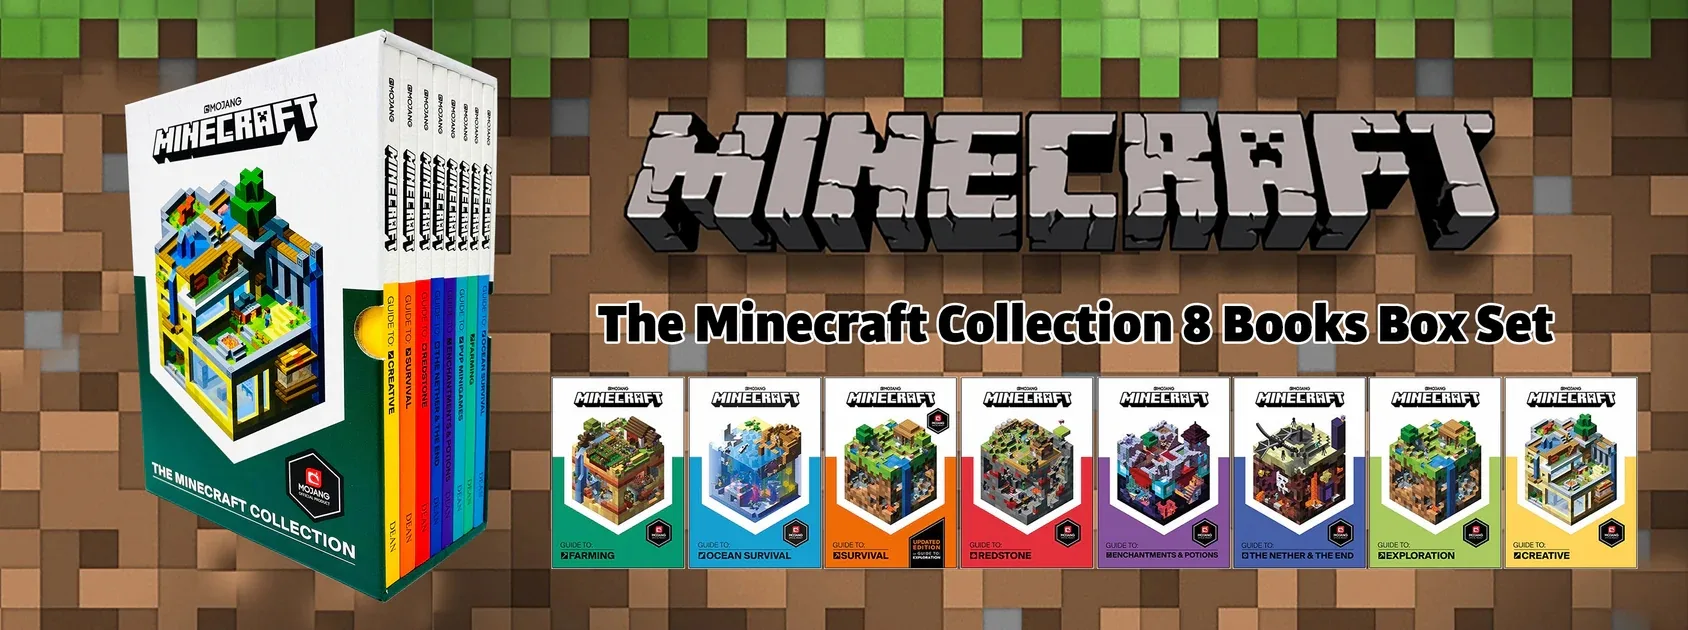 The Minecraft Collection 8 Books Box Set Banner